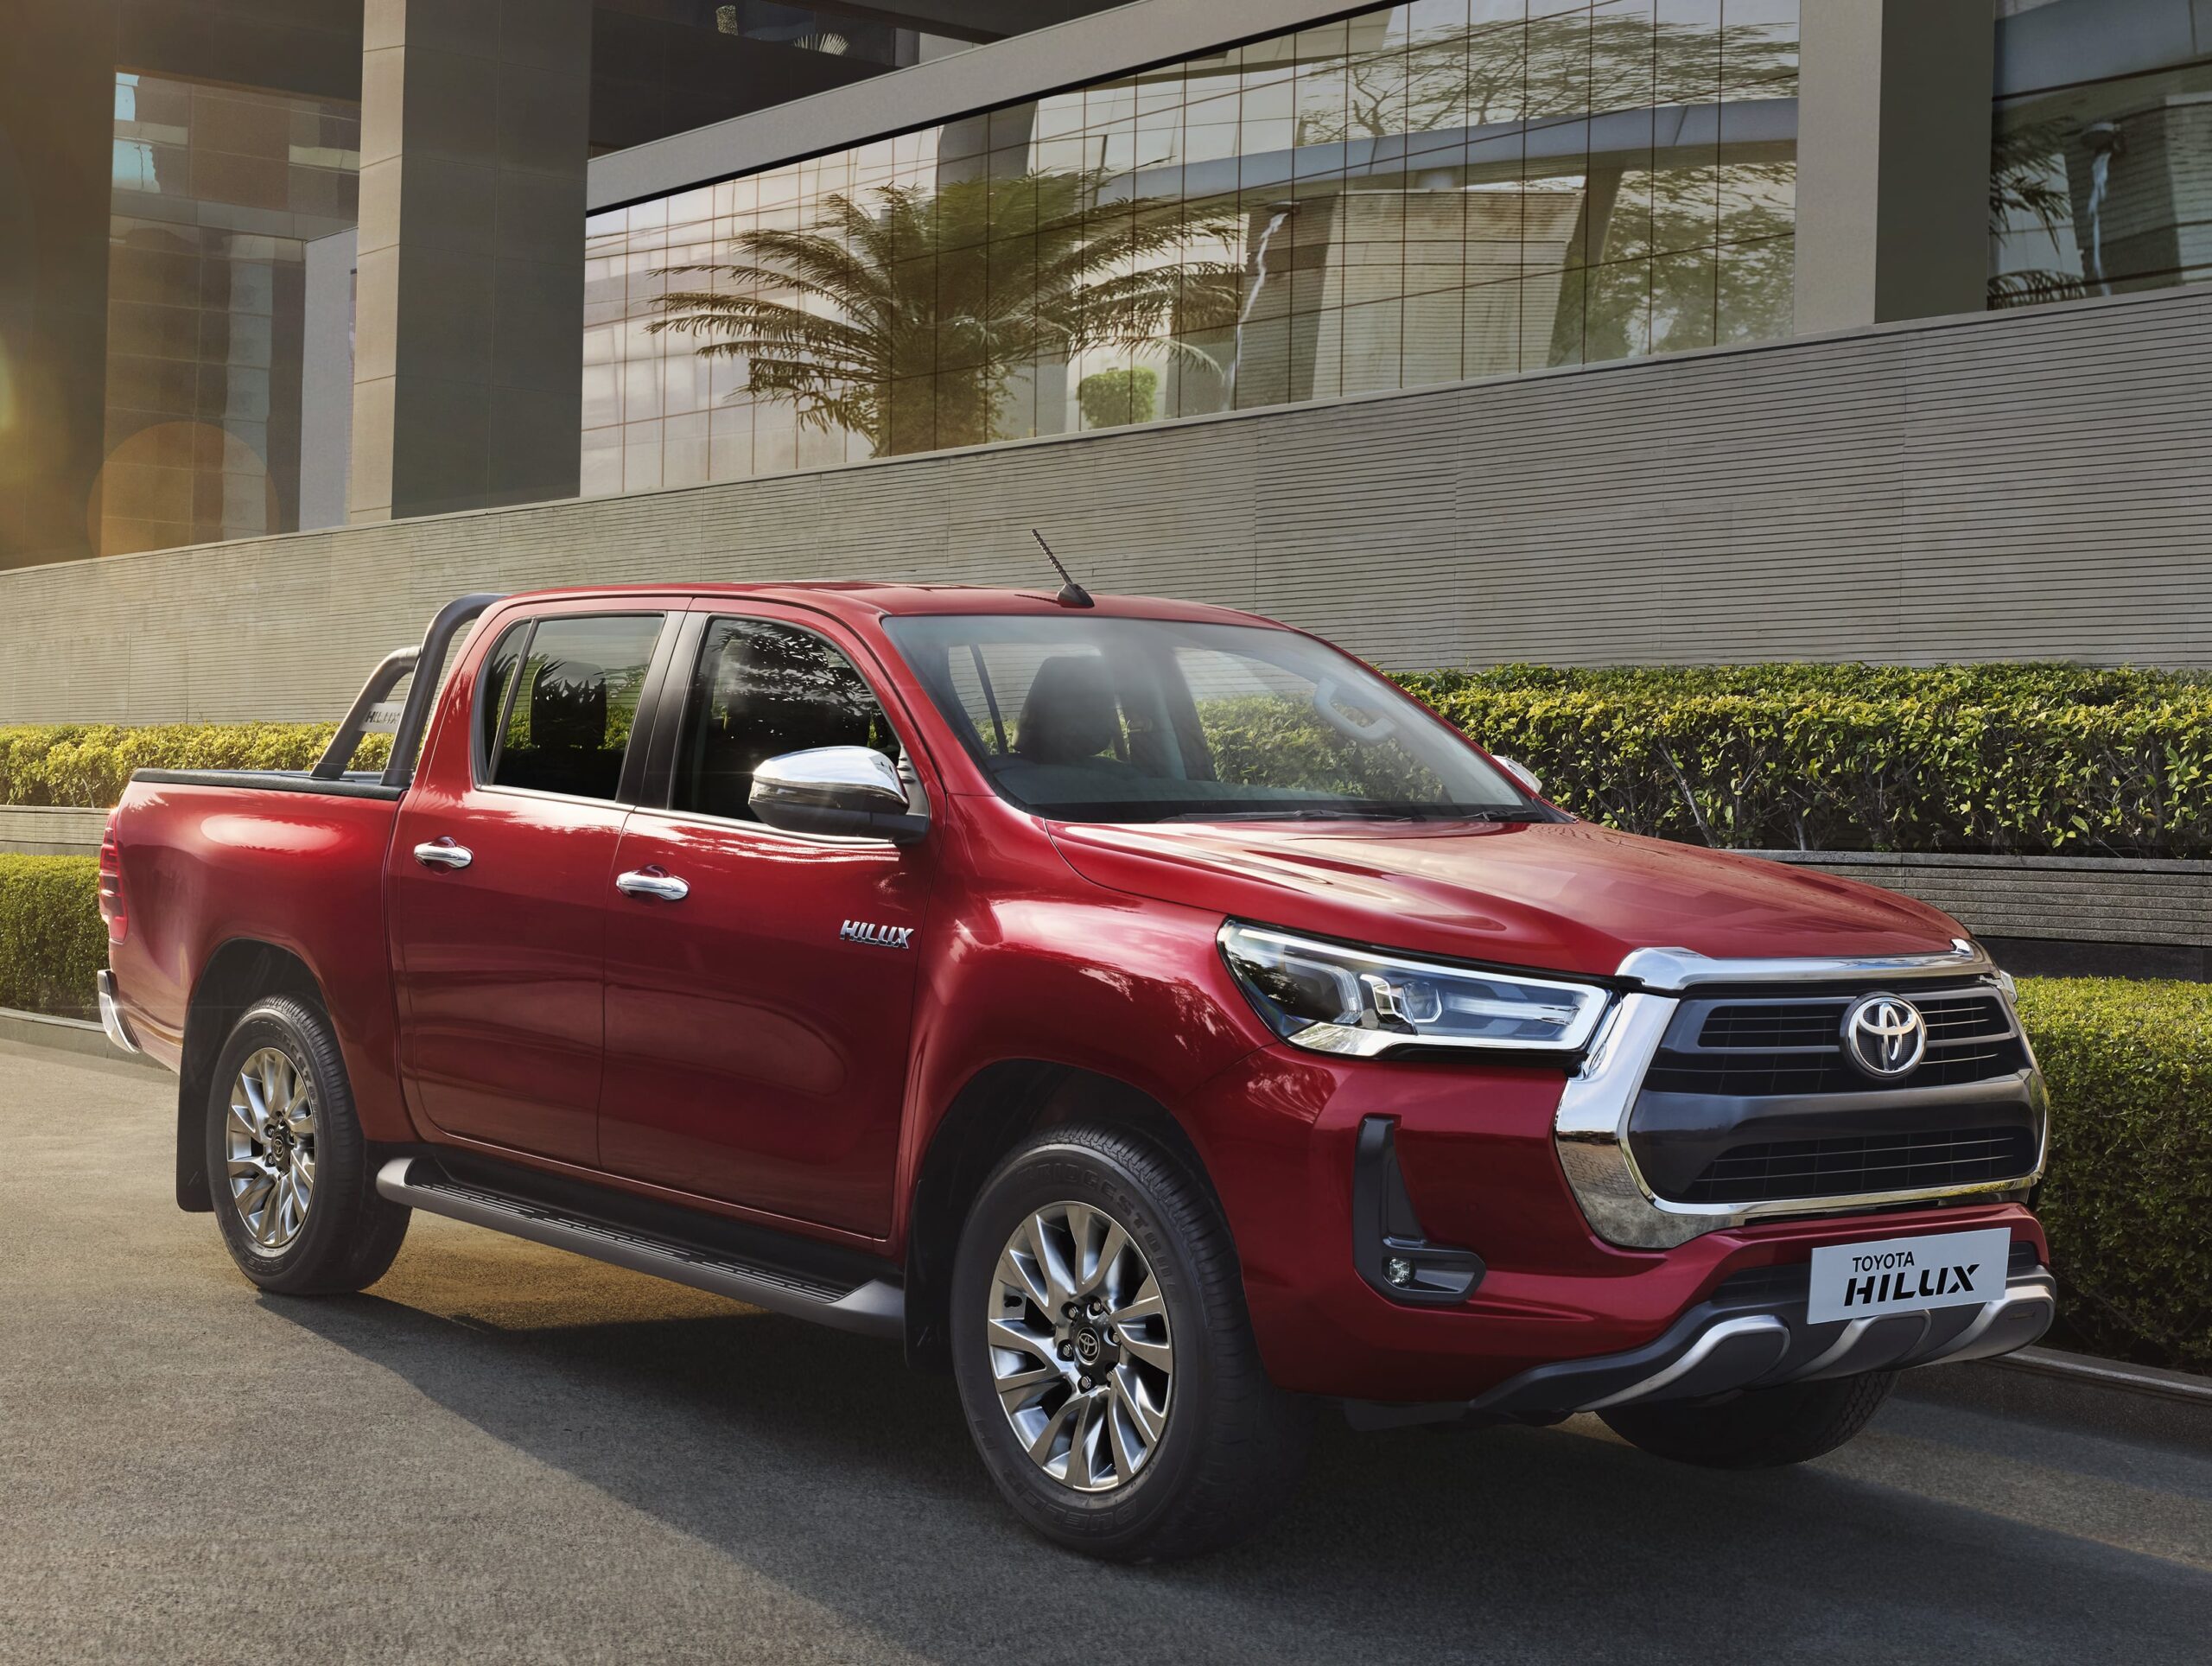 2022 Toyota Hilux India Launch Price Soon - All Details Released! (1)